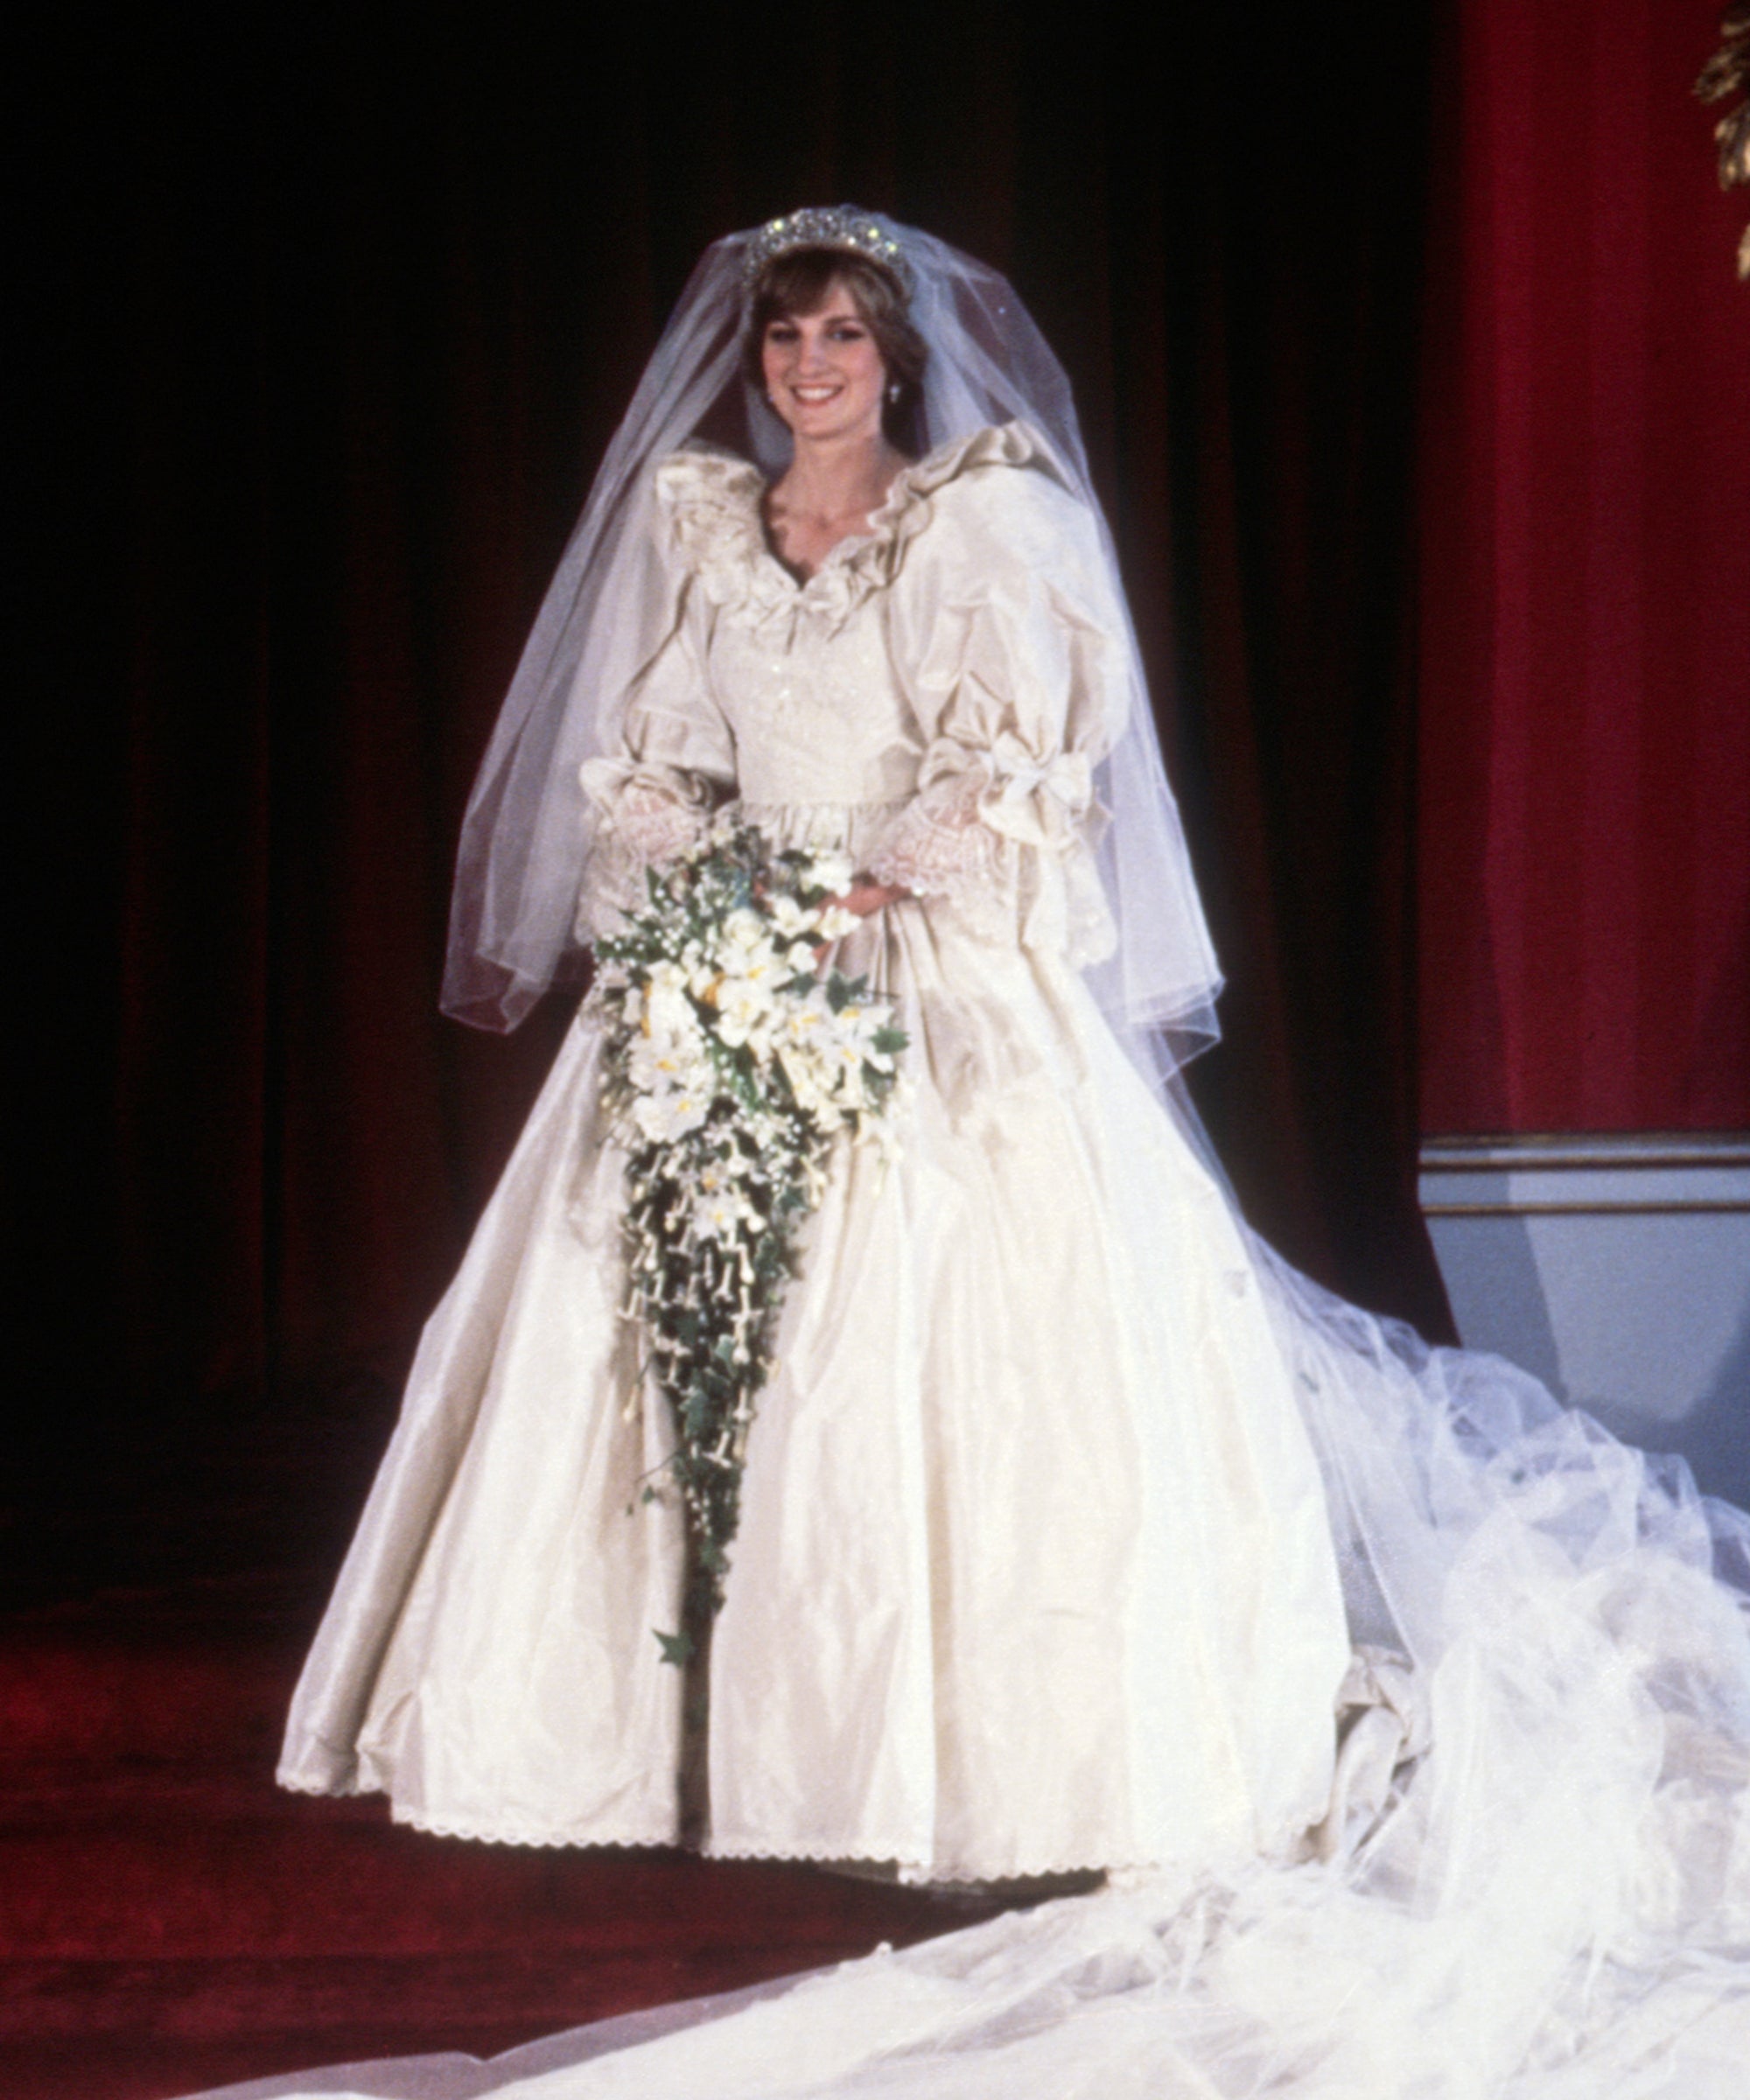 Why The Crown Painstakingly Recreated Princess Diana's Wedding Dress |  Vanity Fair